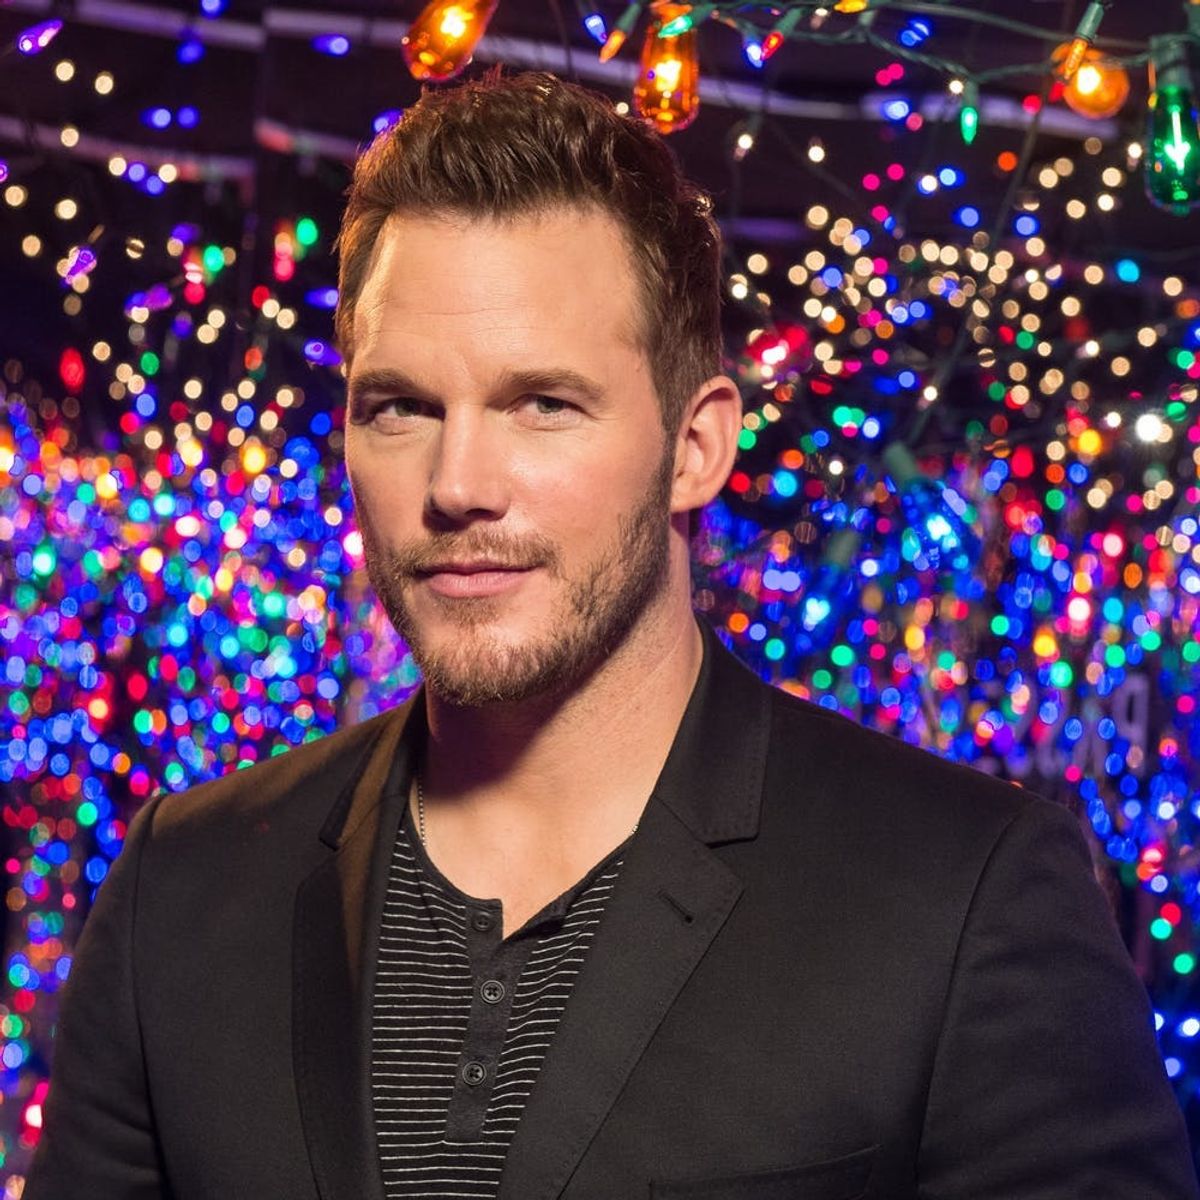 Chris Pratt Is Warning Female Fans About an Imposter Using a Fake Facebook Account